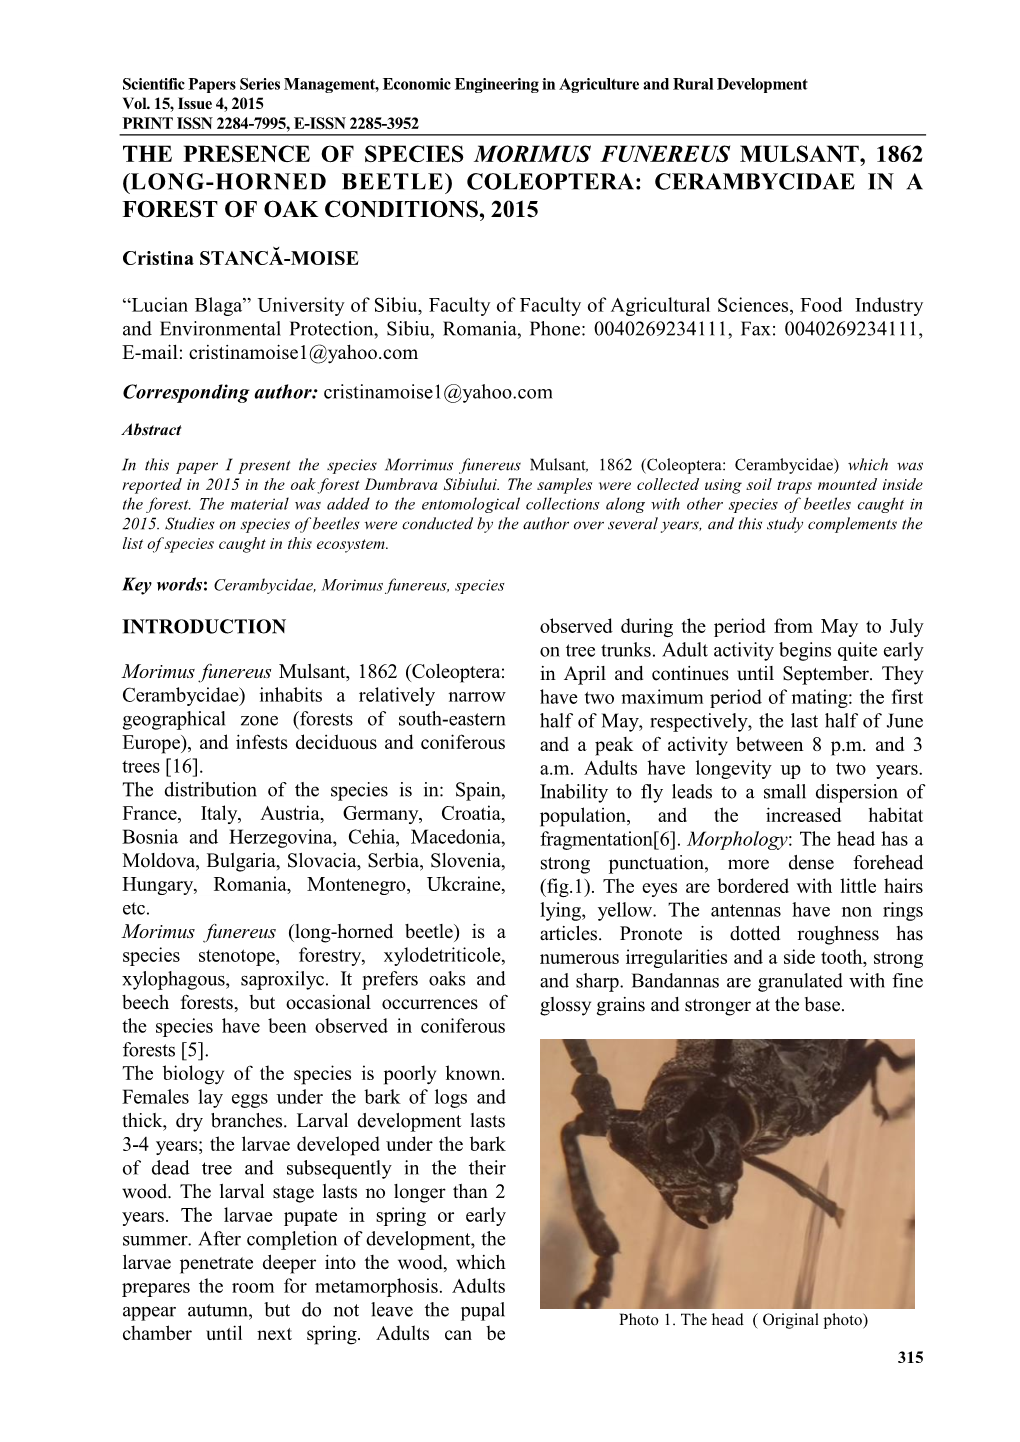 The Presence of Species Morimus Funereus Mulsant, 1862 (Long-Horned Beetle) Coleoptera: Cerambycidae in a Forest of Oak Conditions, 2015